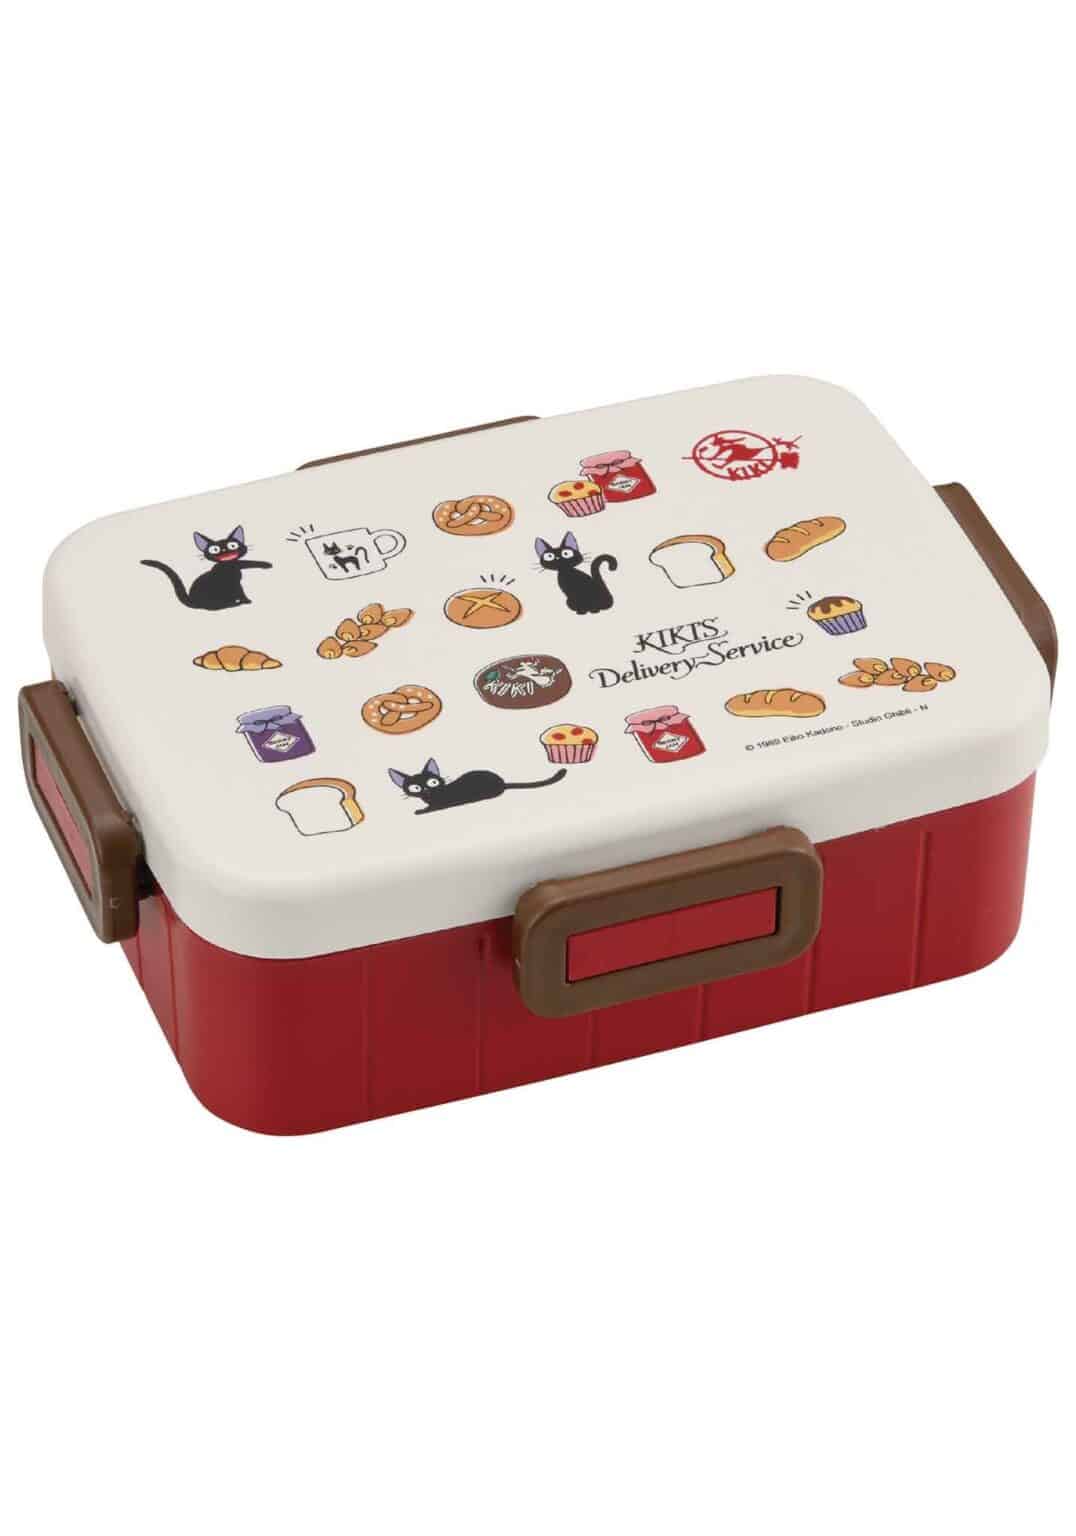 Clever Idiots Kiki’s Delivery Service Bento Lunch Box 22oz 650ml (Bakery) Kawaii Gifts 4973307561450